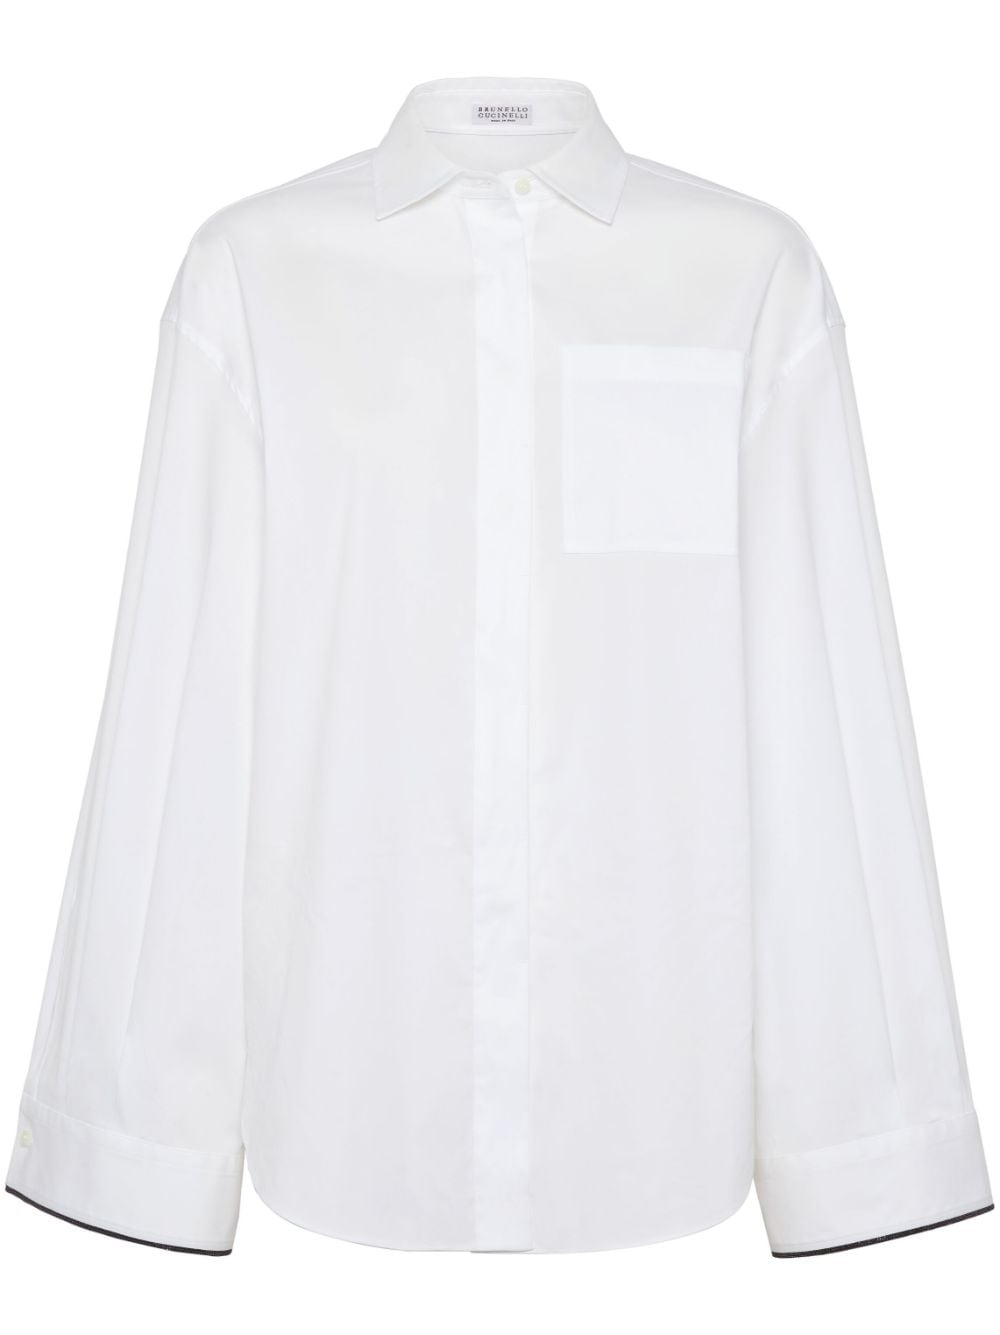 Shirt with contrasting edge